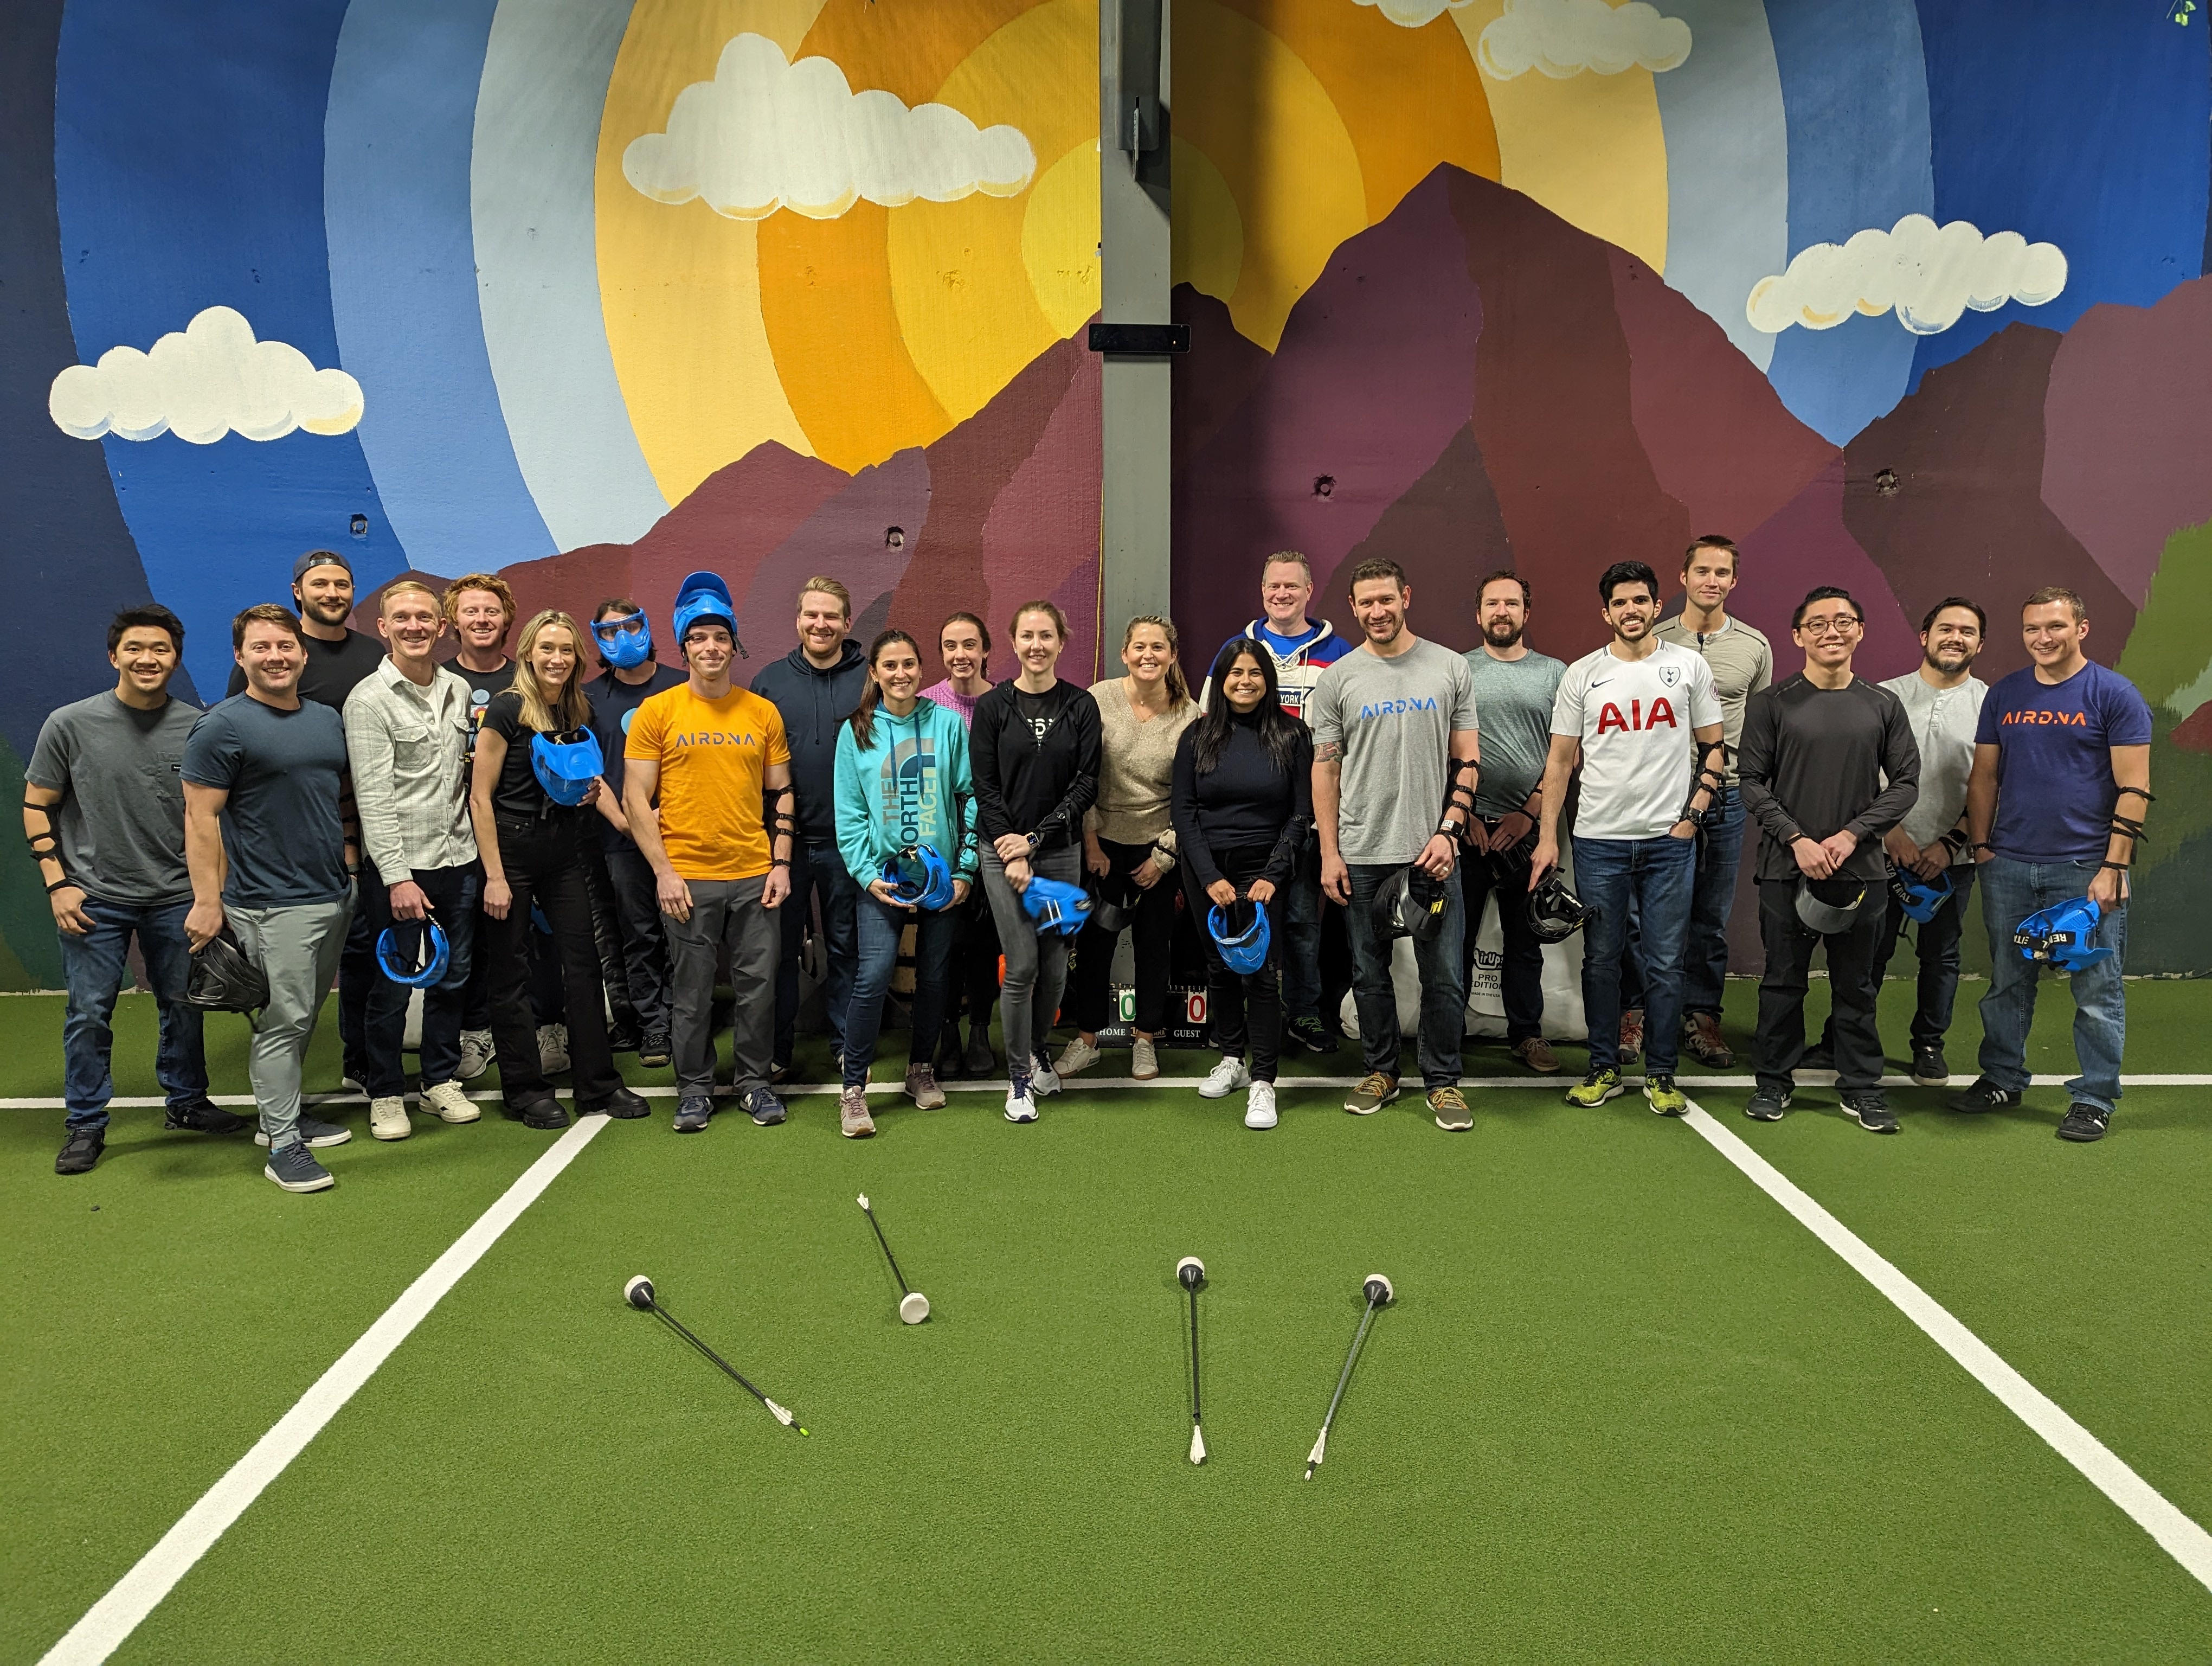 Members of the AirDNA team participate in a team building activity in a sports center.